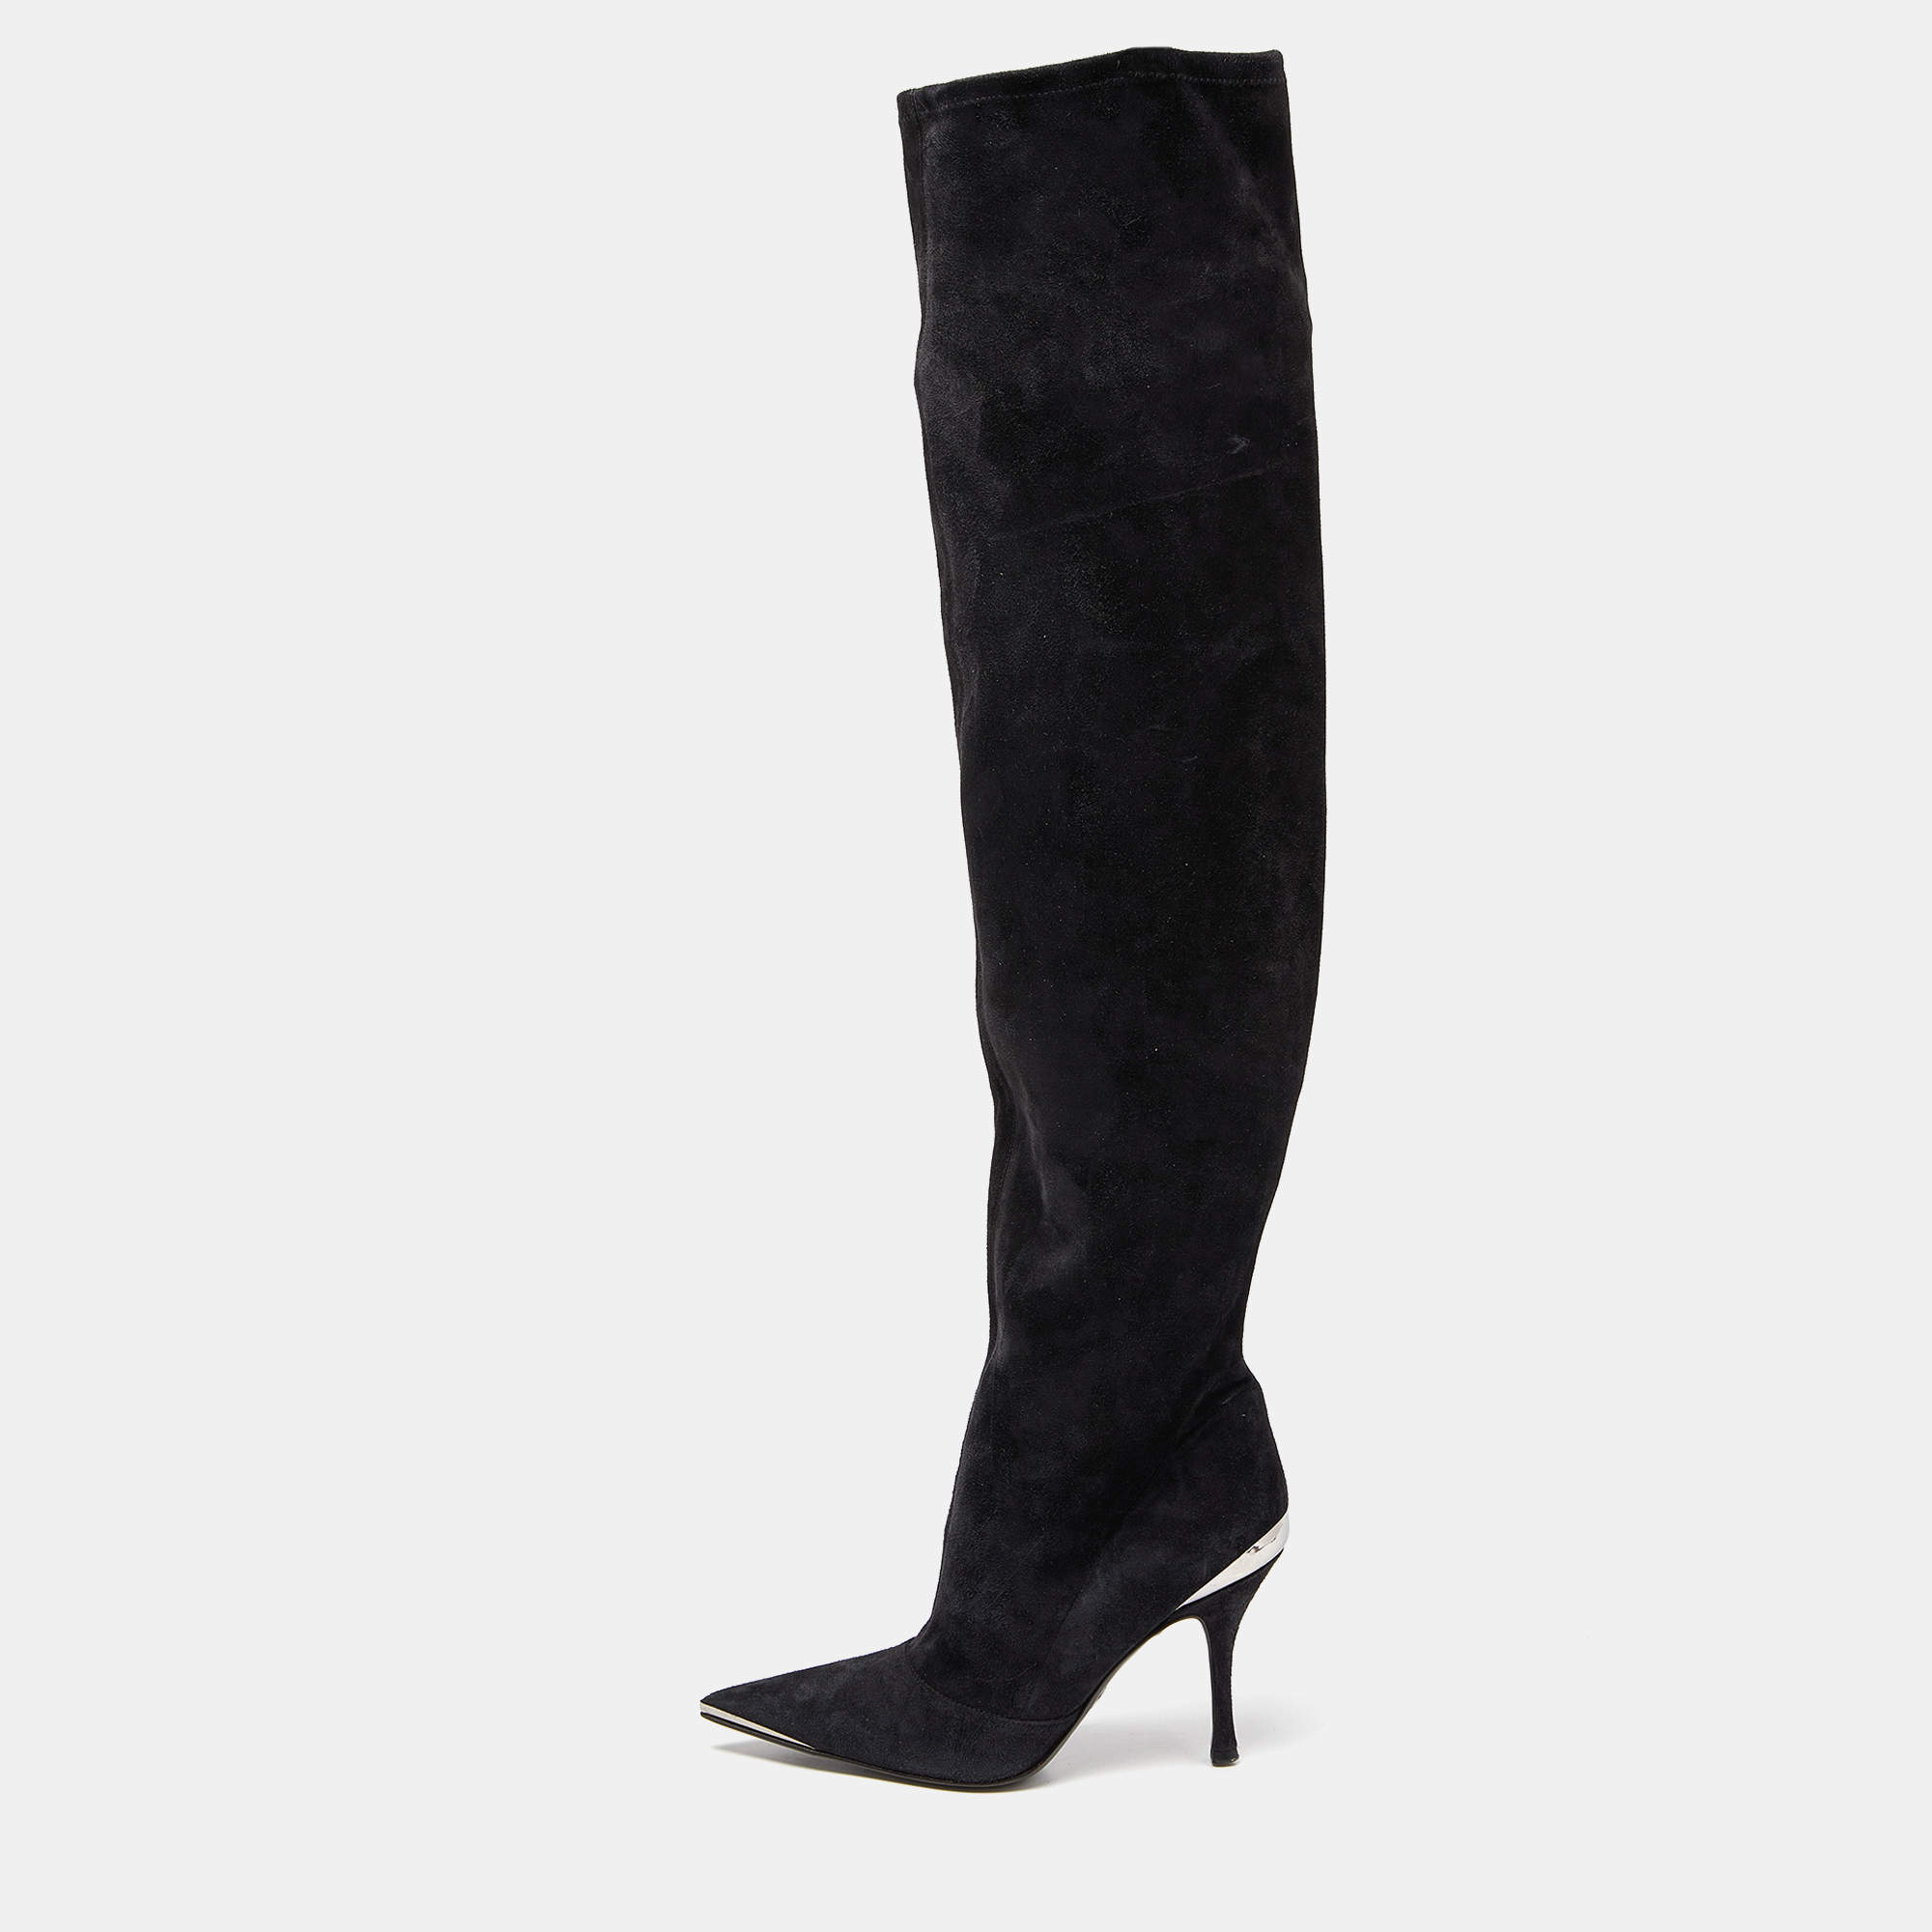 Dolce & Gabbana Black Suede Metal Over the Knee Boots Size 38.5